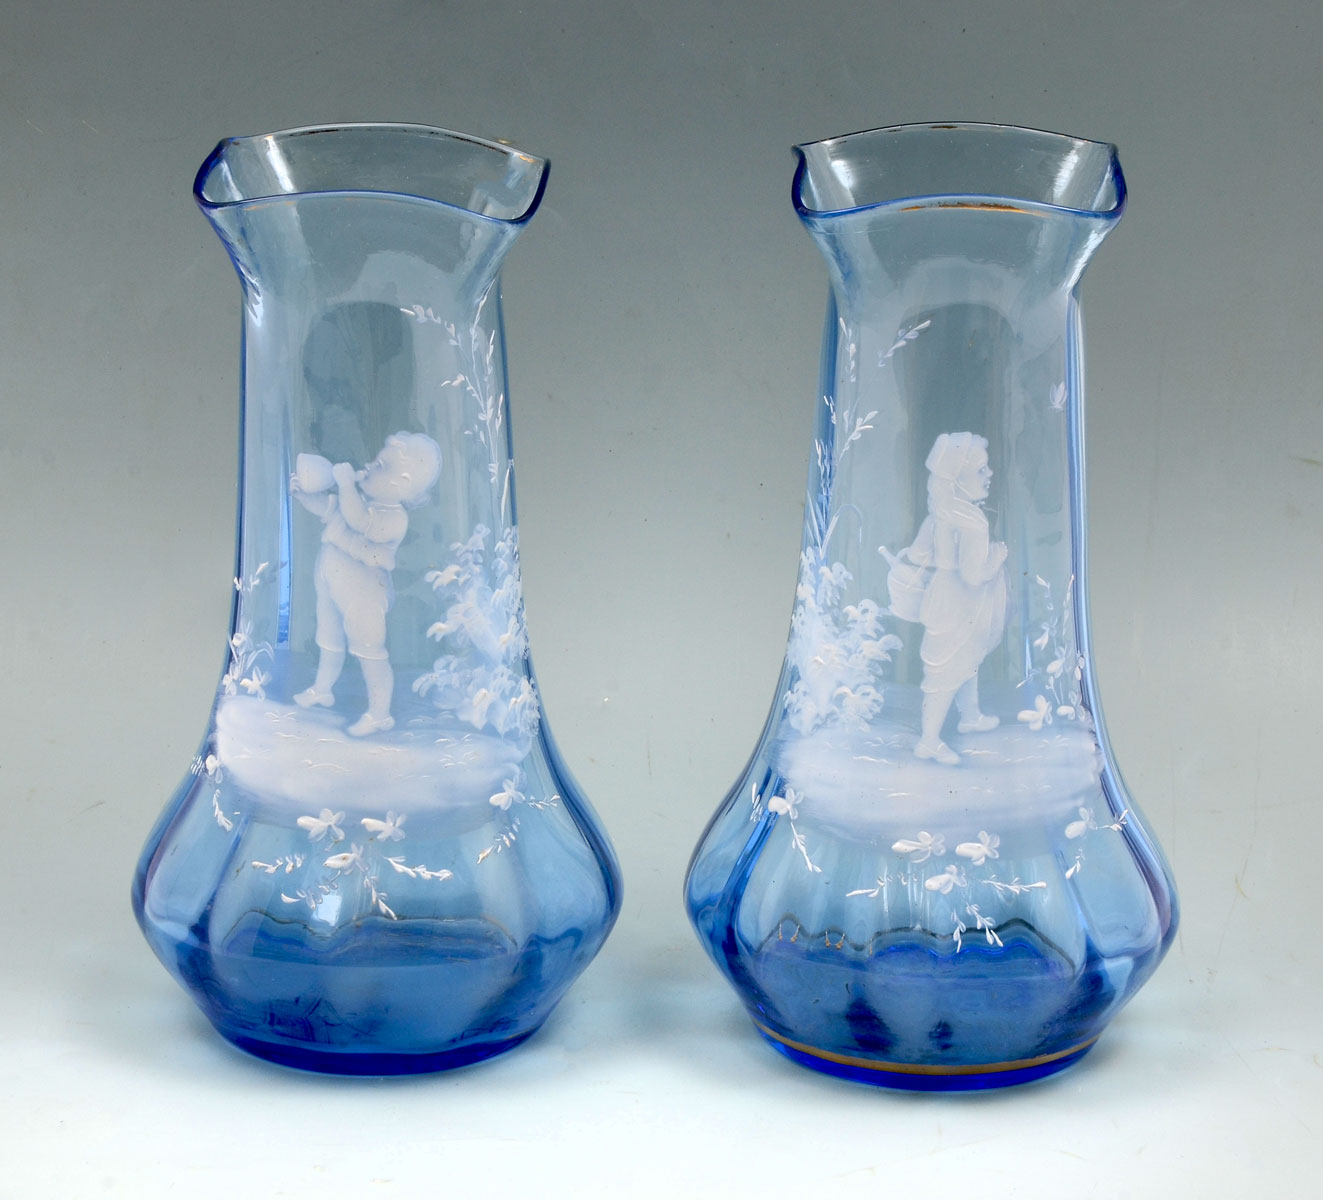 2 PIECE BLUE MARY GREGORY VASES: